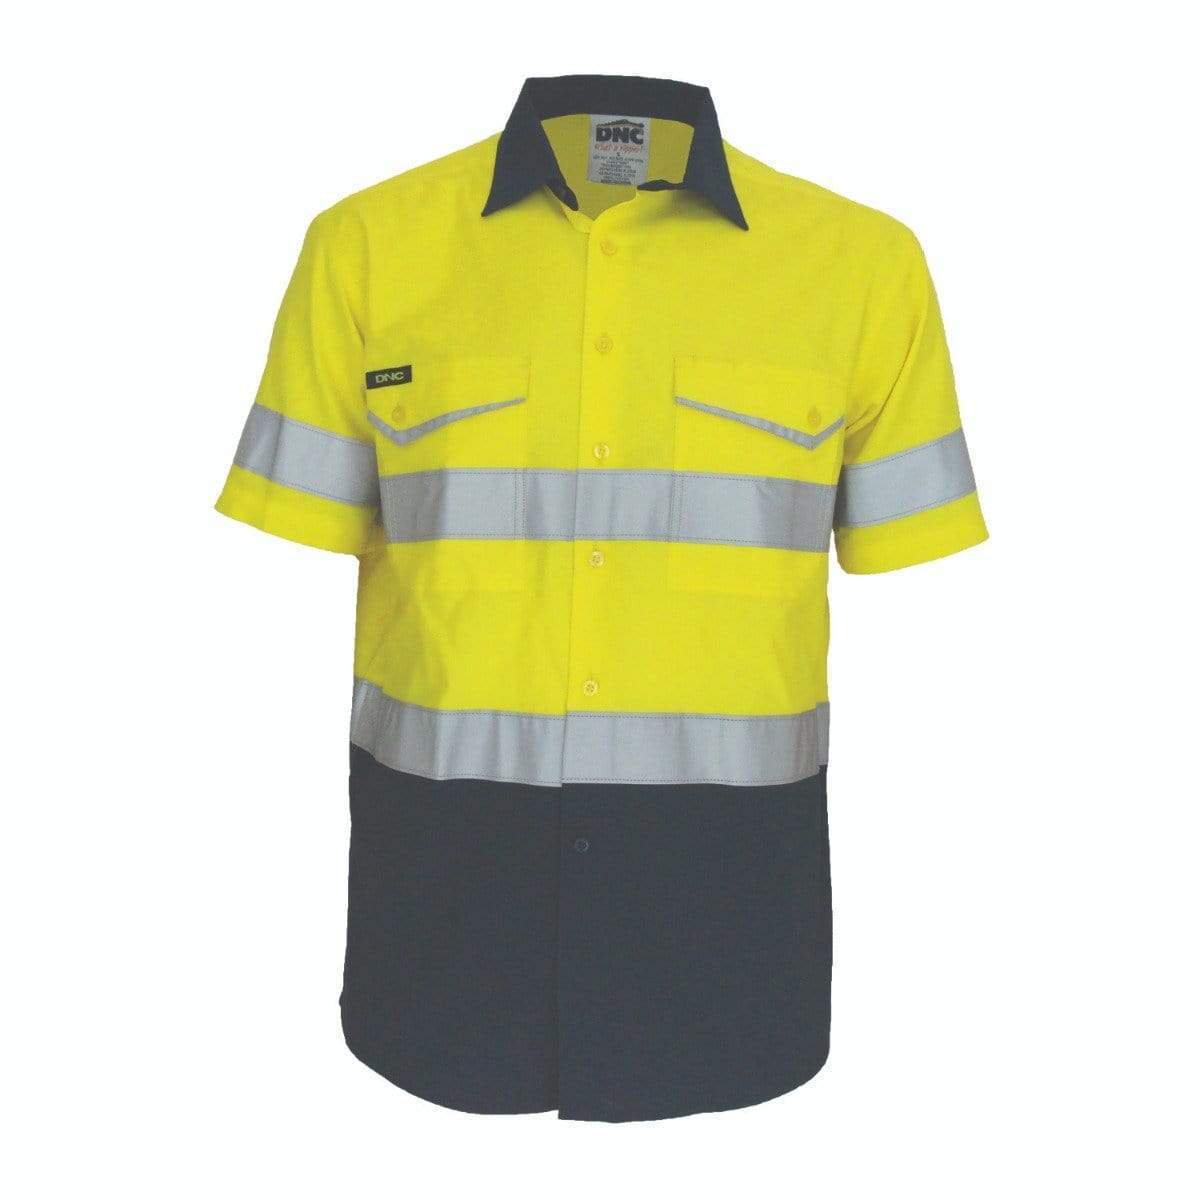 DNC Workwear Work Wear Yellow/Navy / XS DNC WORKWEAR Two-Tone Ripstop Cotton Short Sleeve Shirt with CSR Reflective Tape 3587